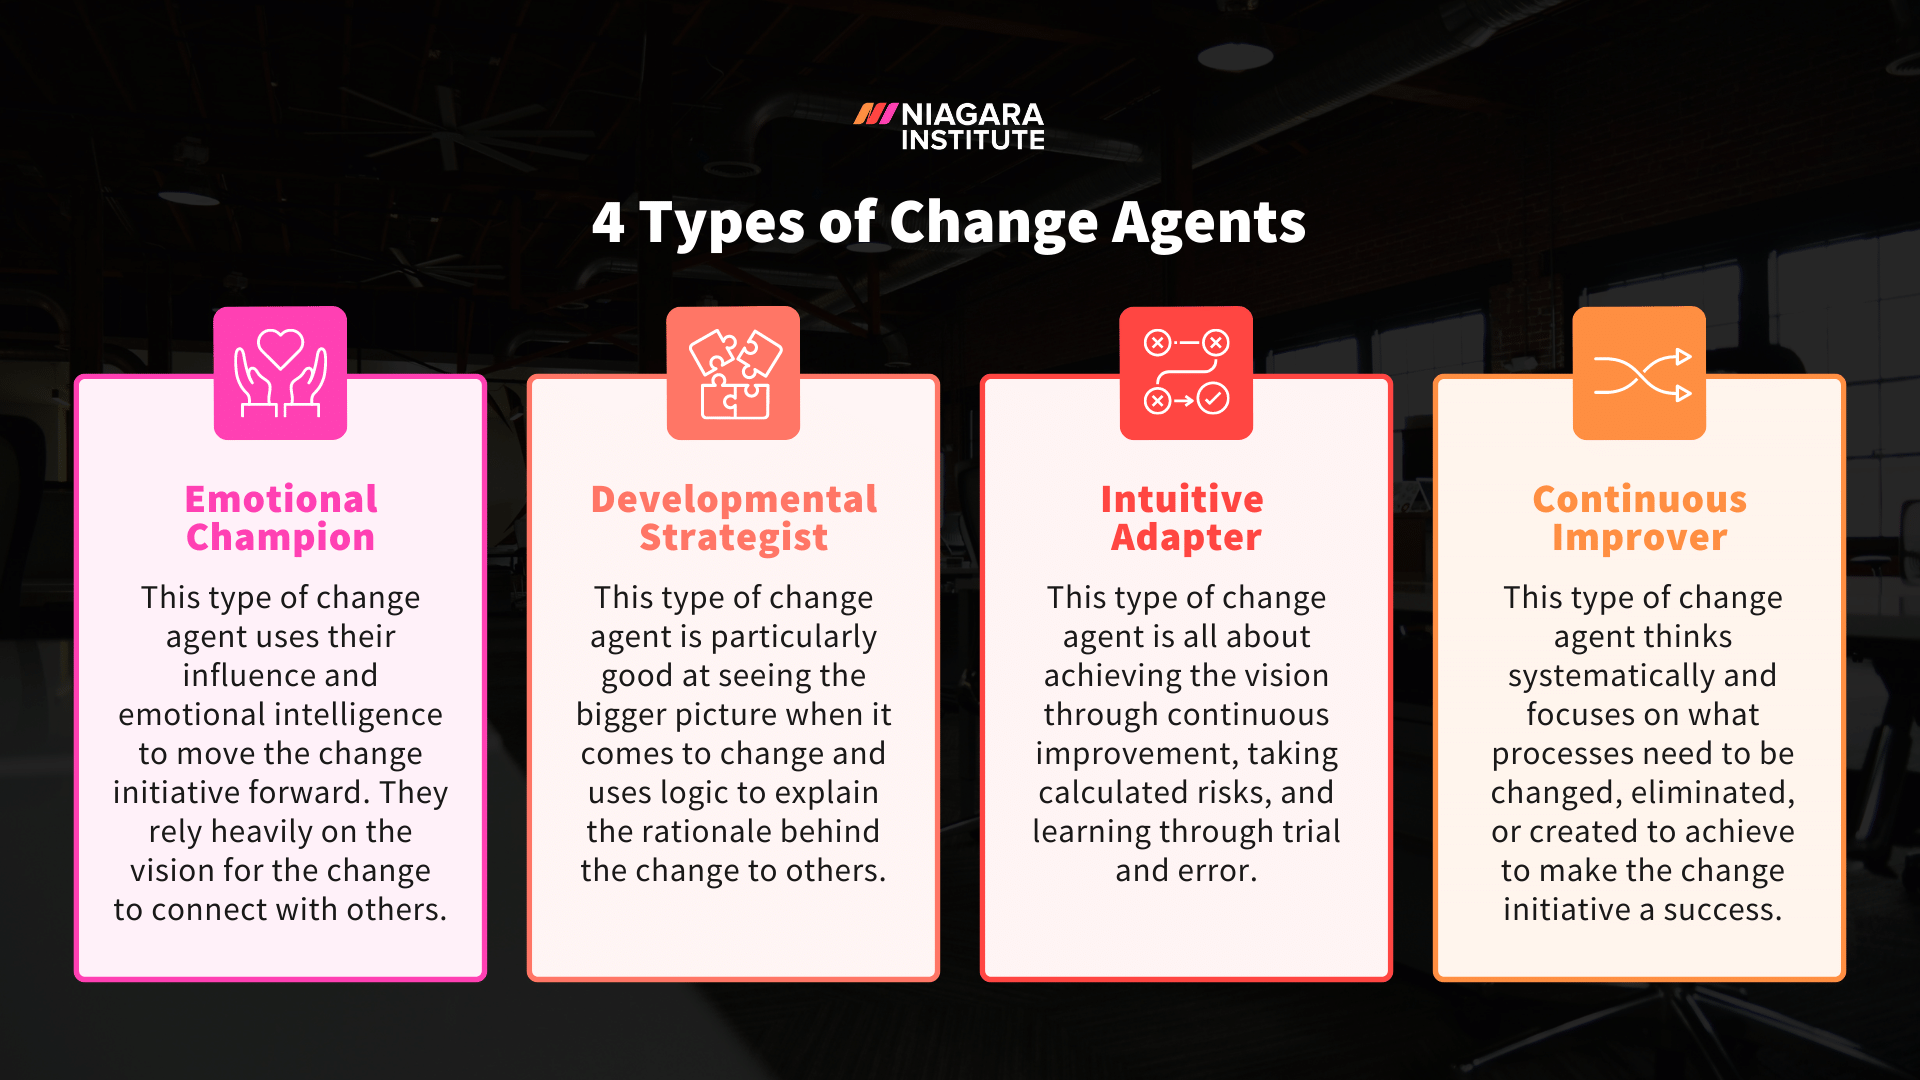 4 Types of Change Agents